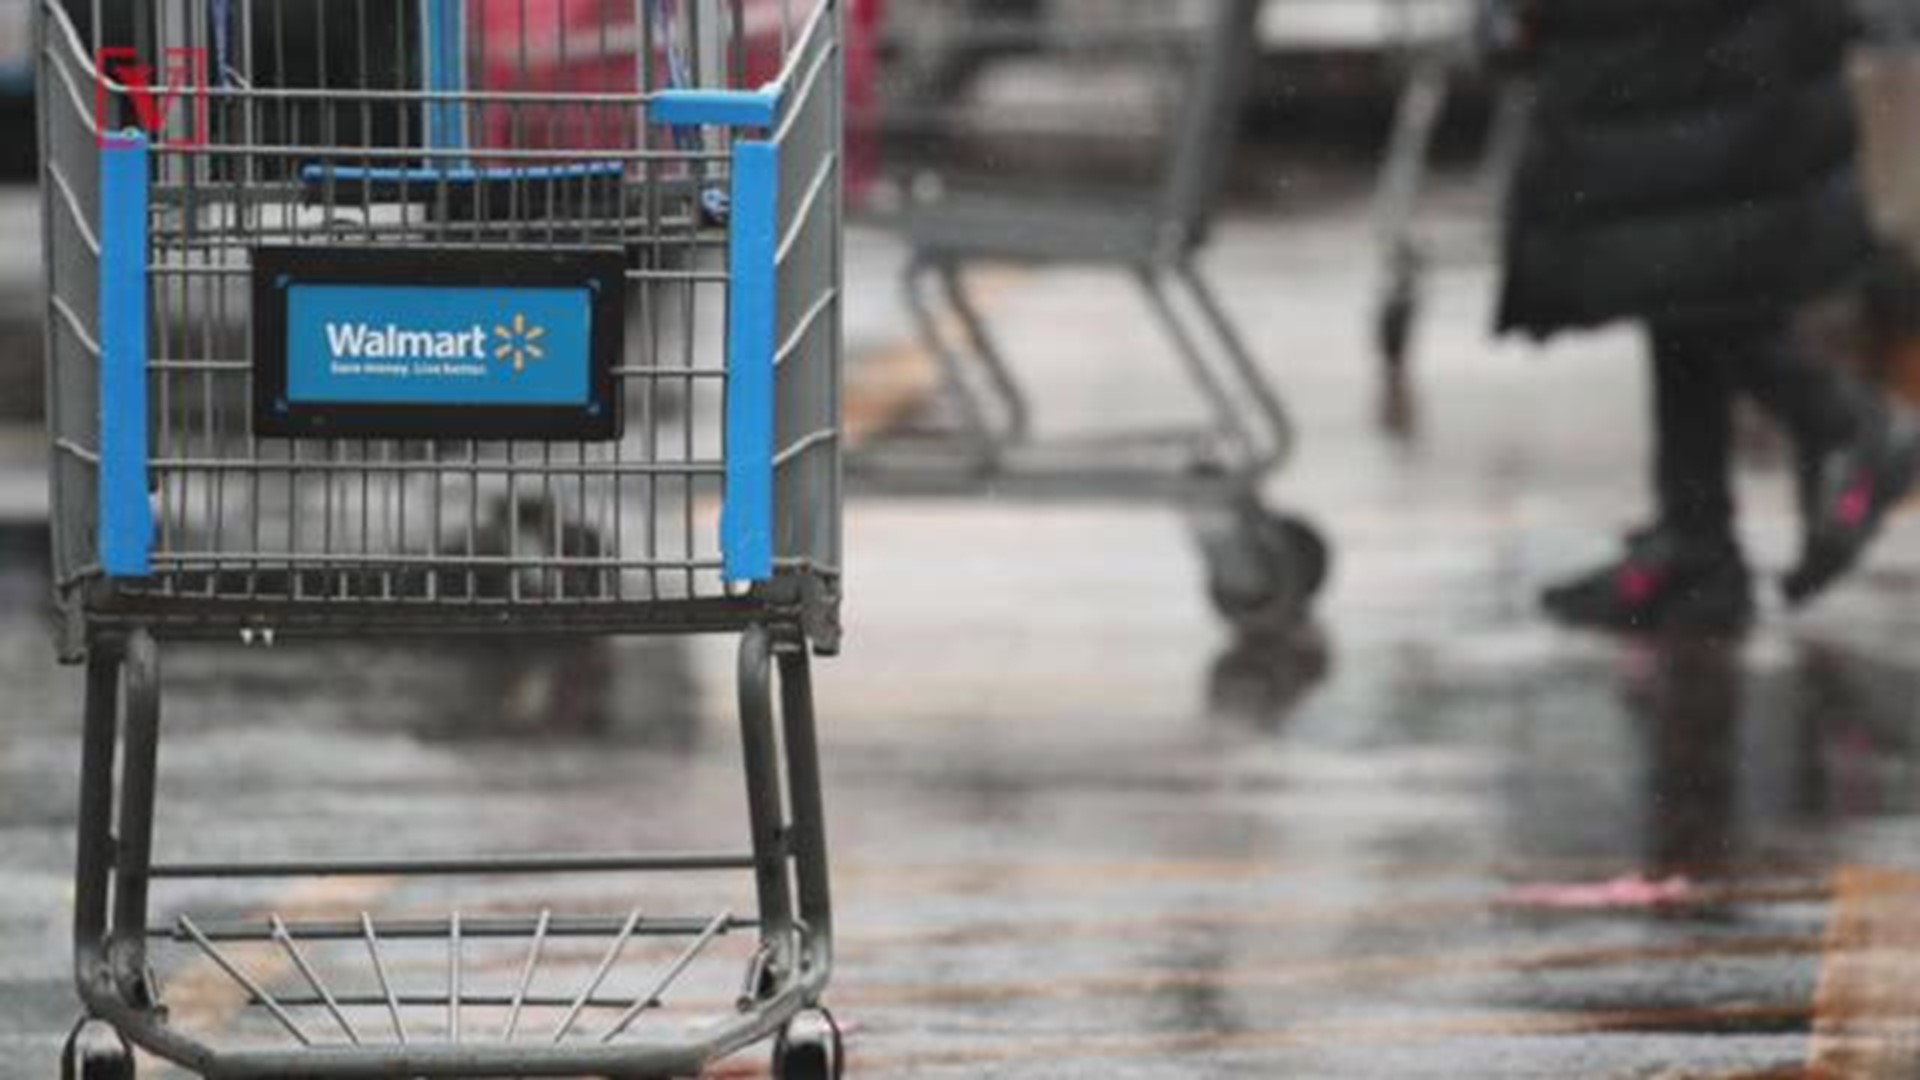 Here's how Walmart gets you to spend more money. Elizabeth Keatinge has more.